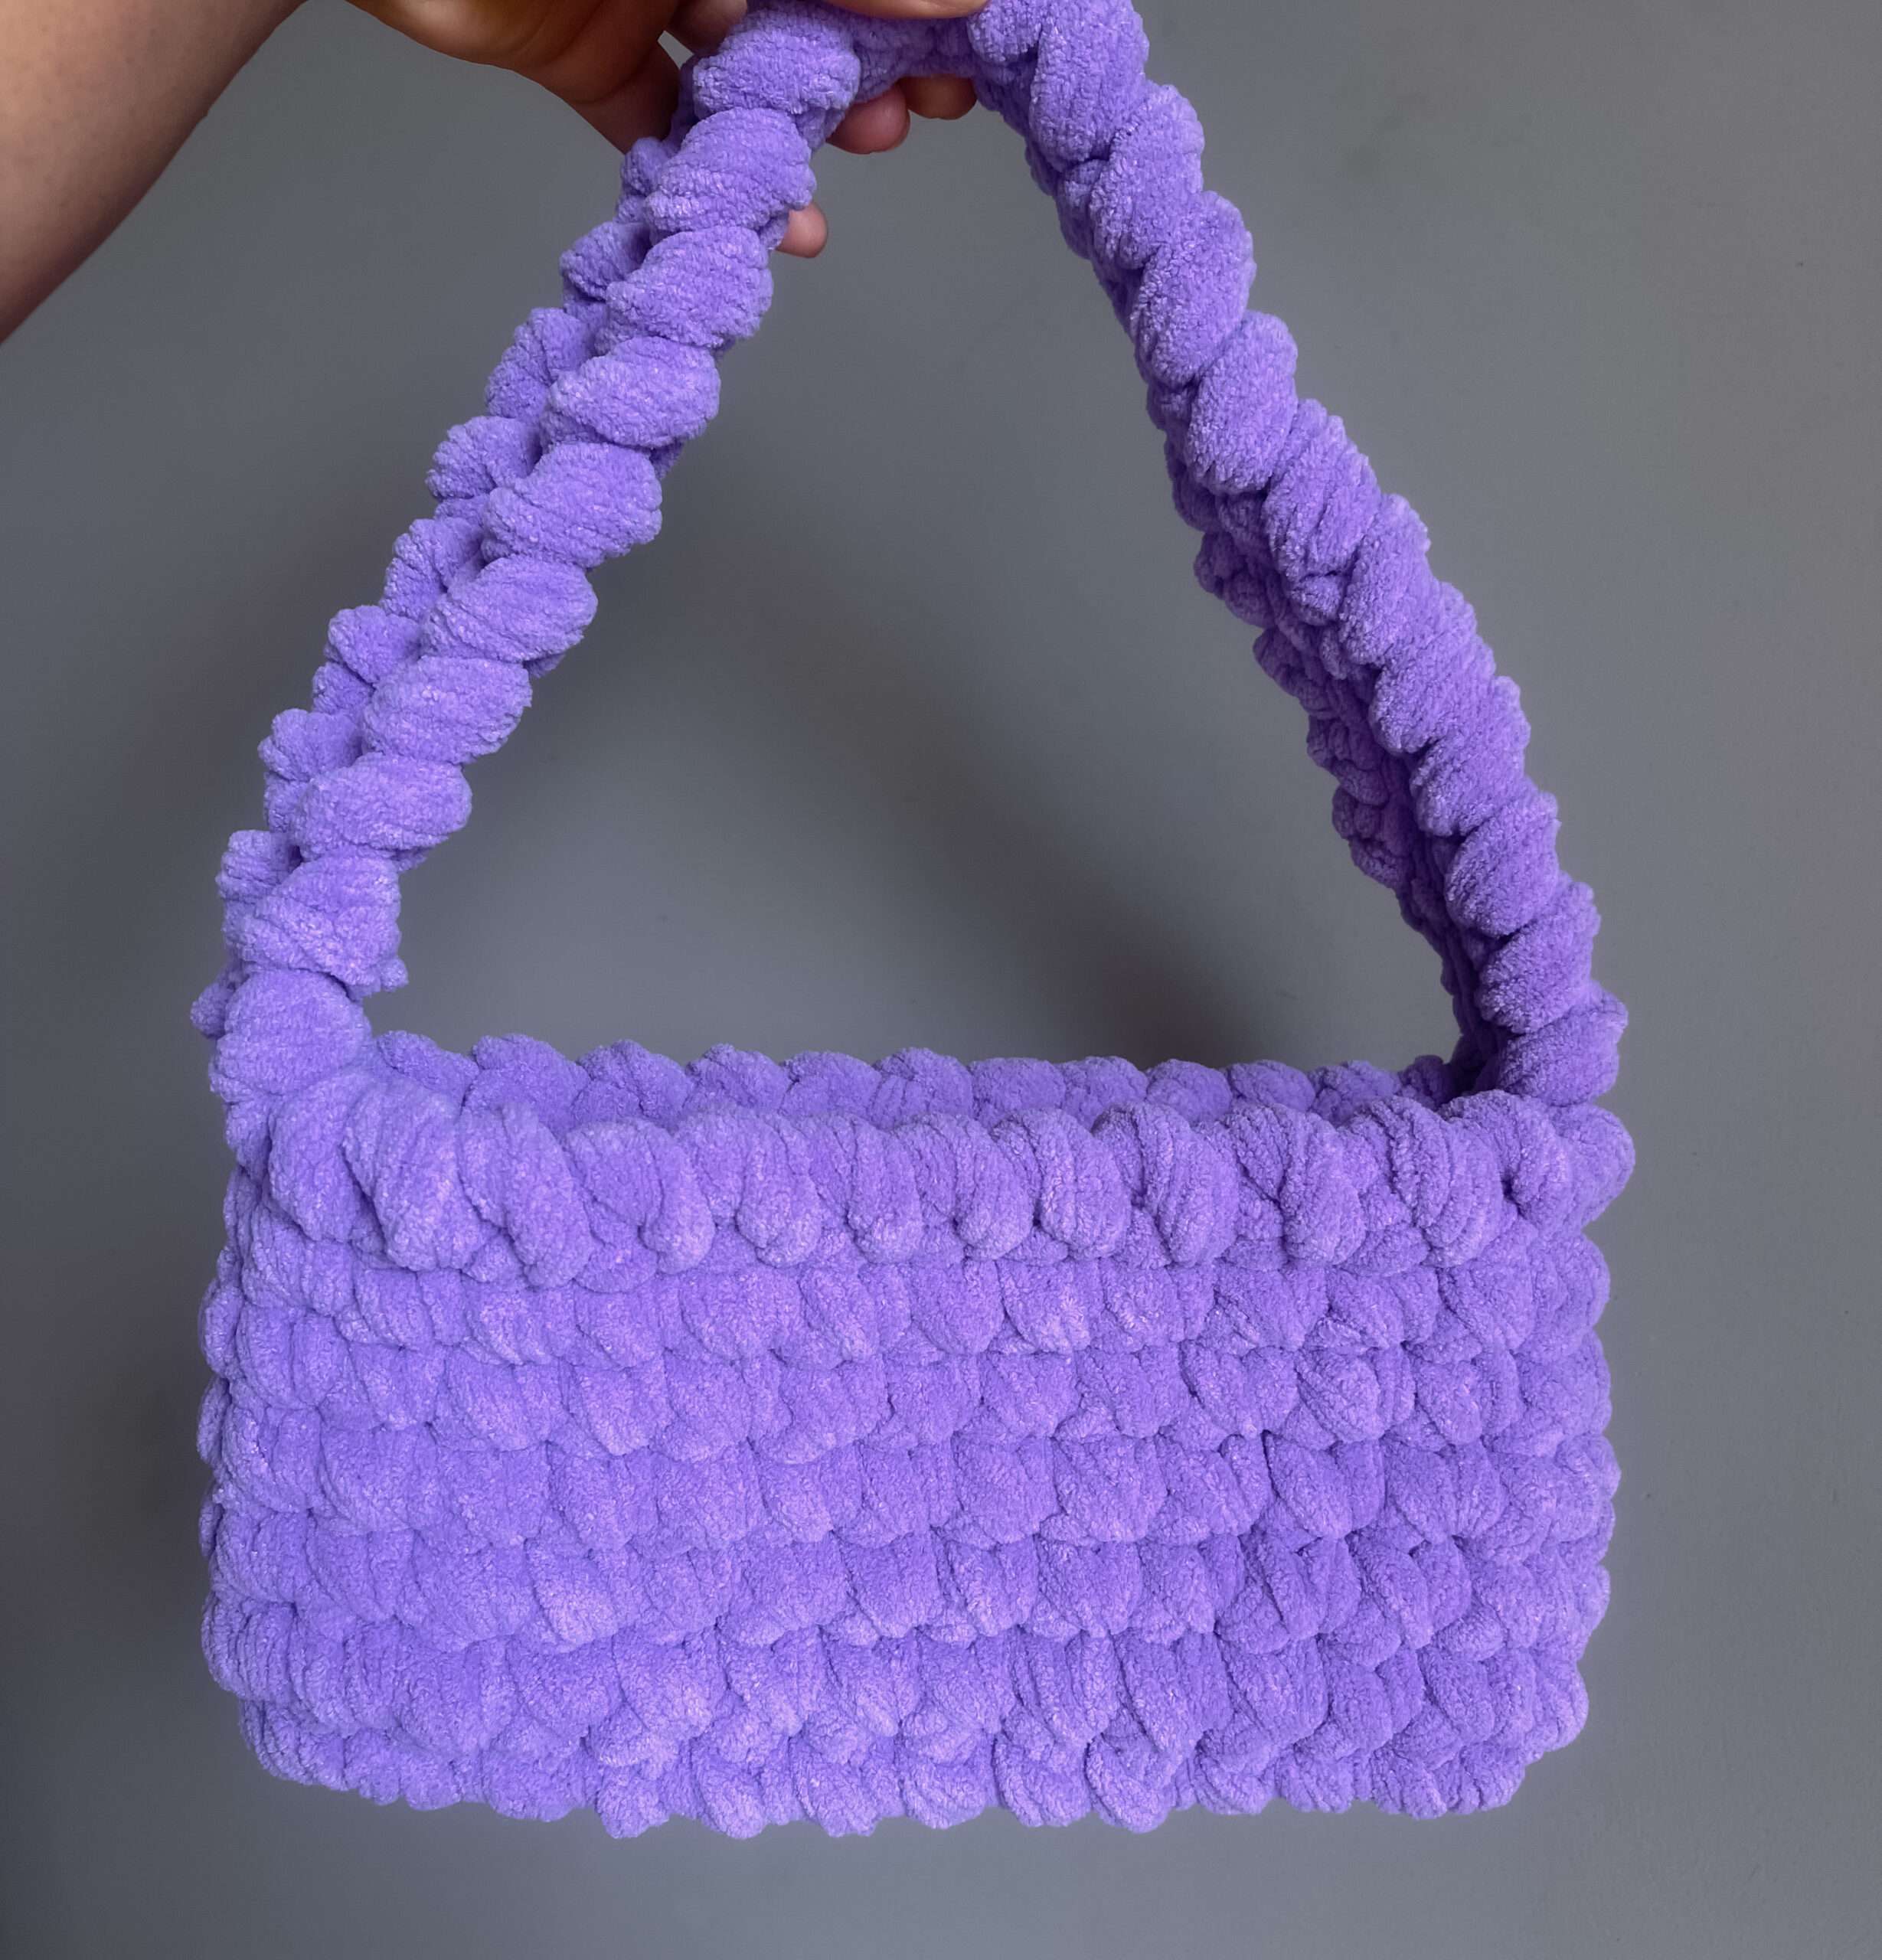 Lilac Roped Bag Crochet Pattern – I Love Stitches